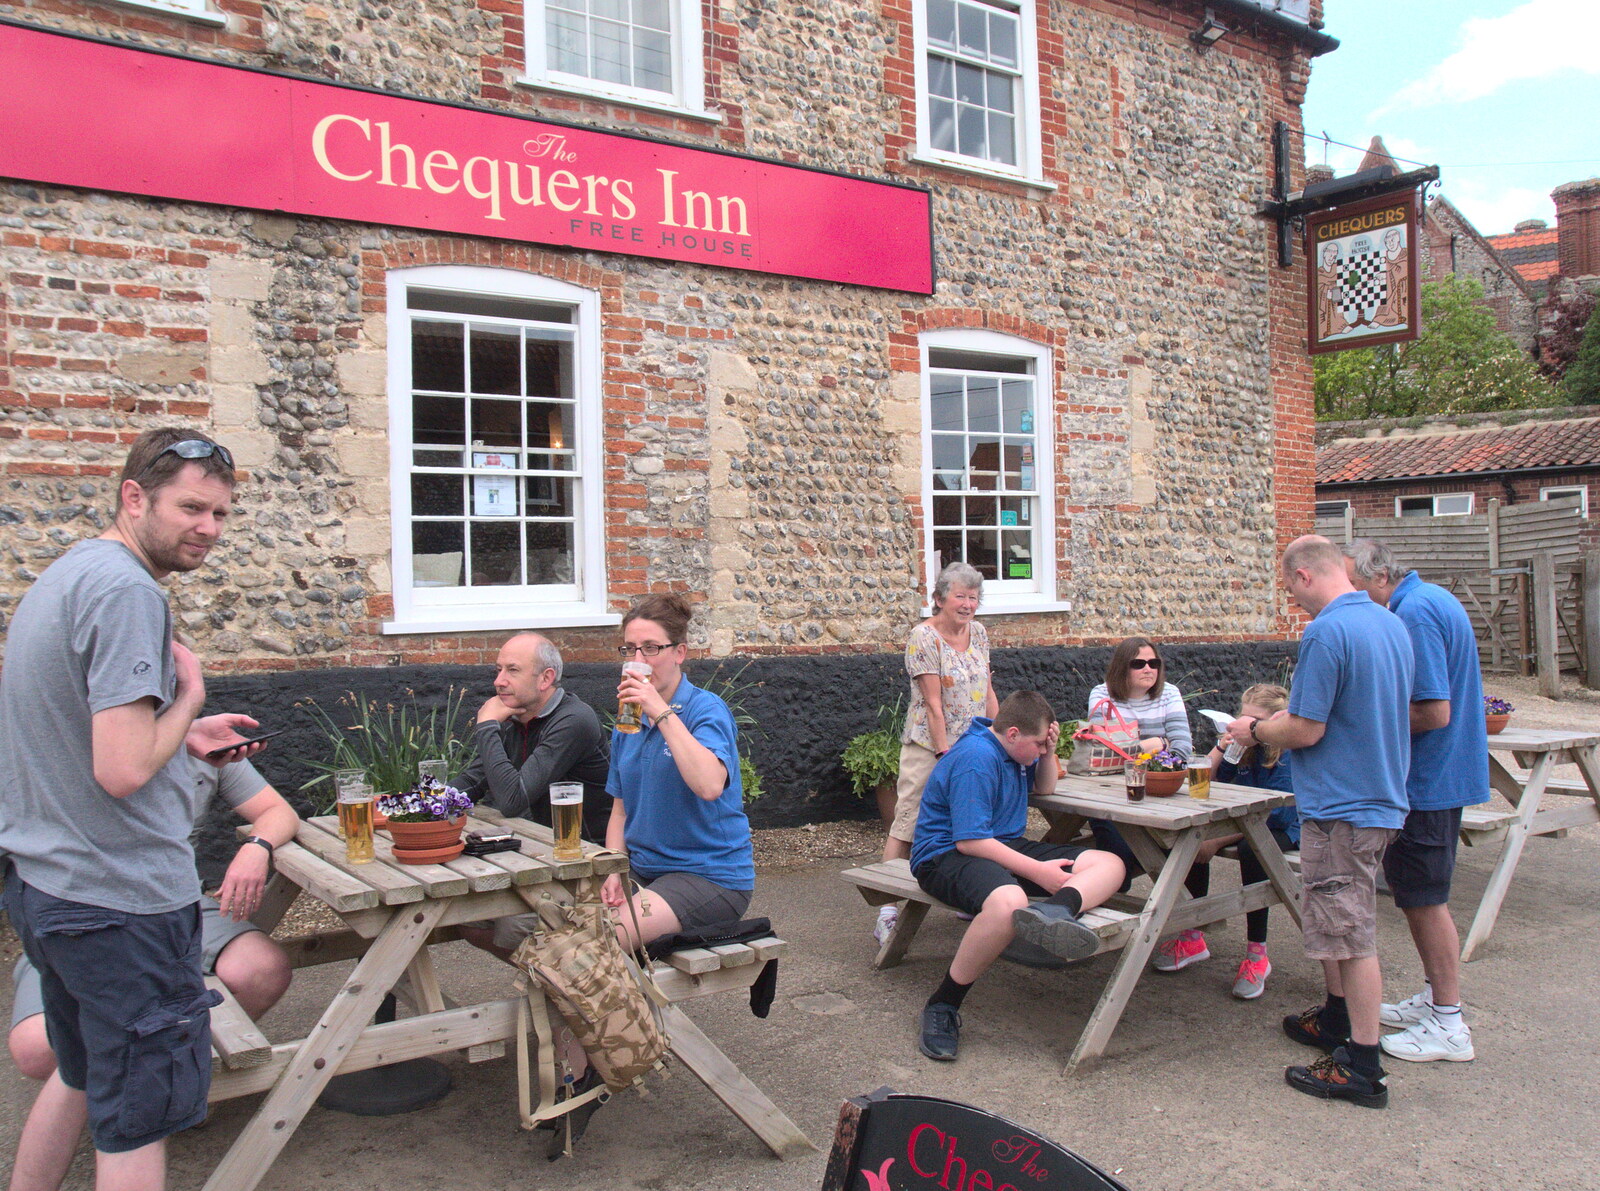 Outside the Chequers Inn for lunch from The BSCC Weekend Away, Holt, Norfolk - 12th May 2018